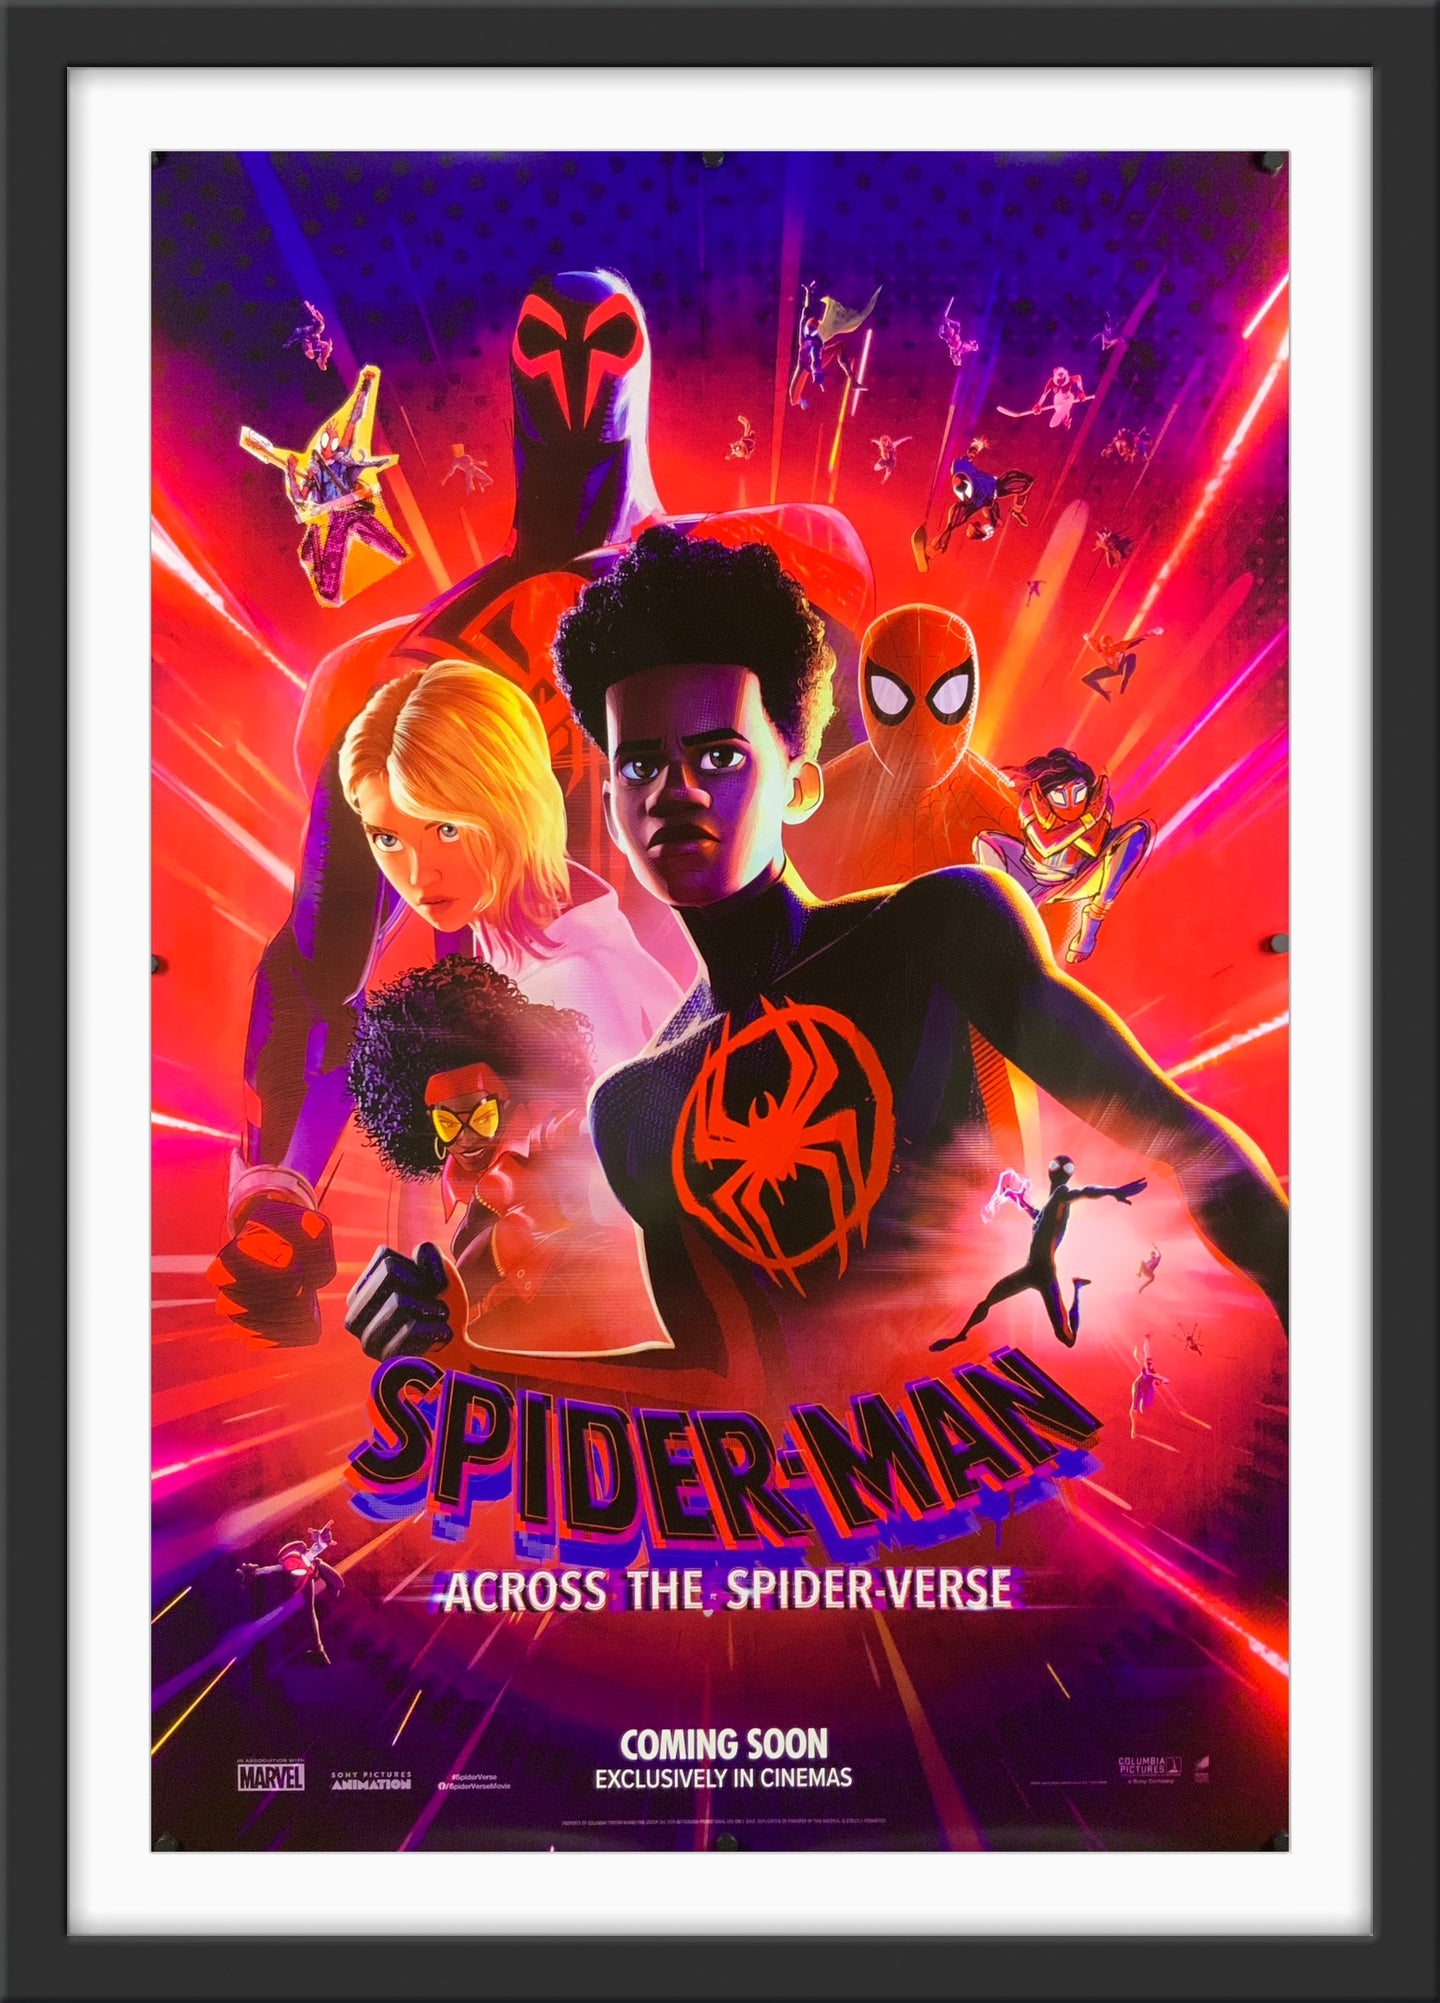 An original movie poster for the film Spider-Man Into The Spider-Verse